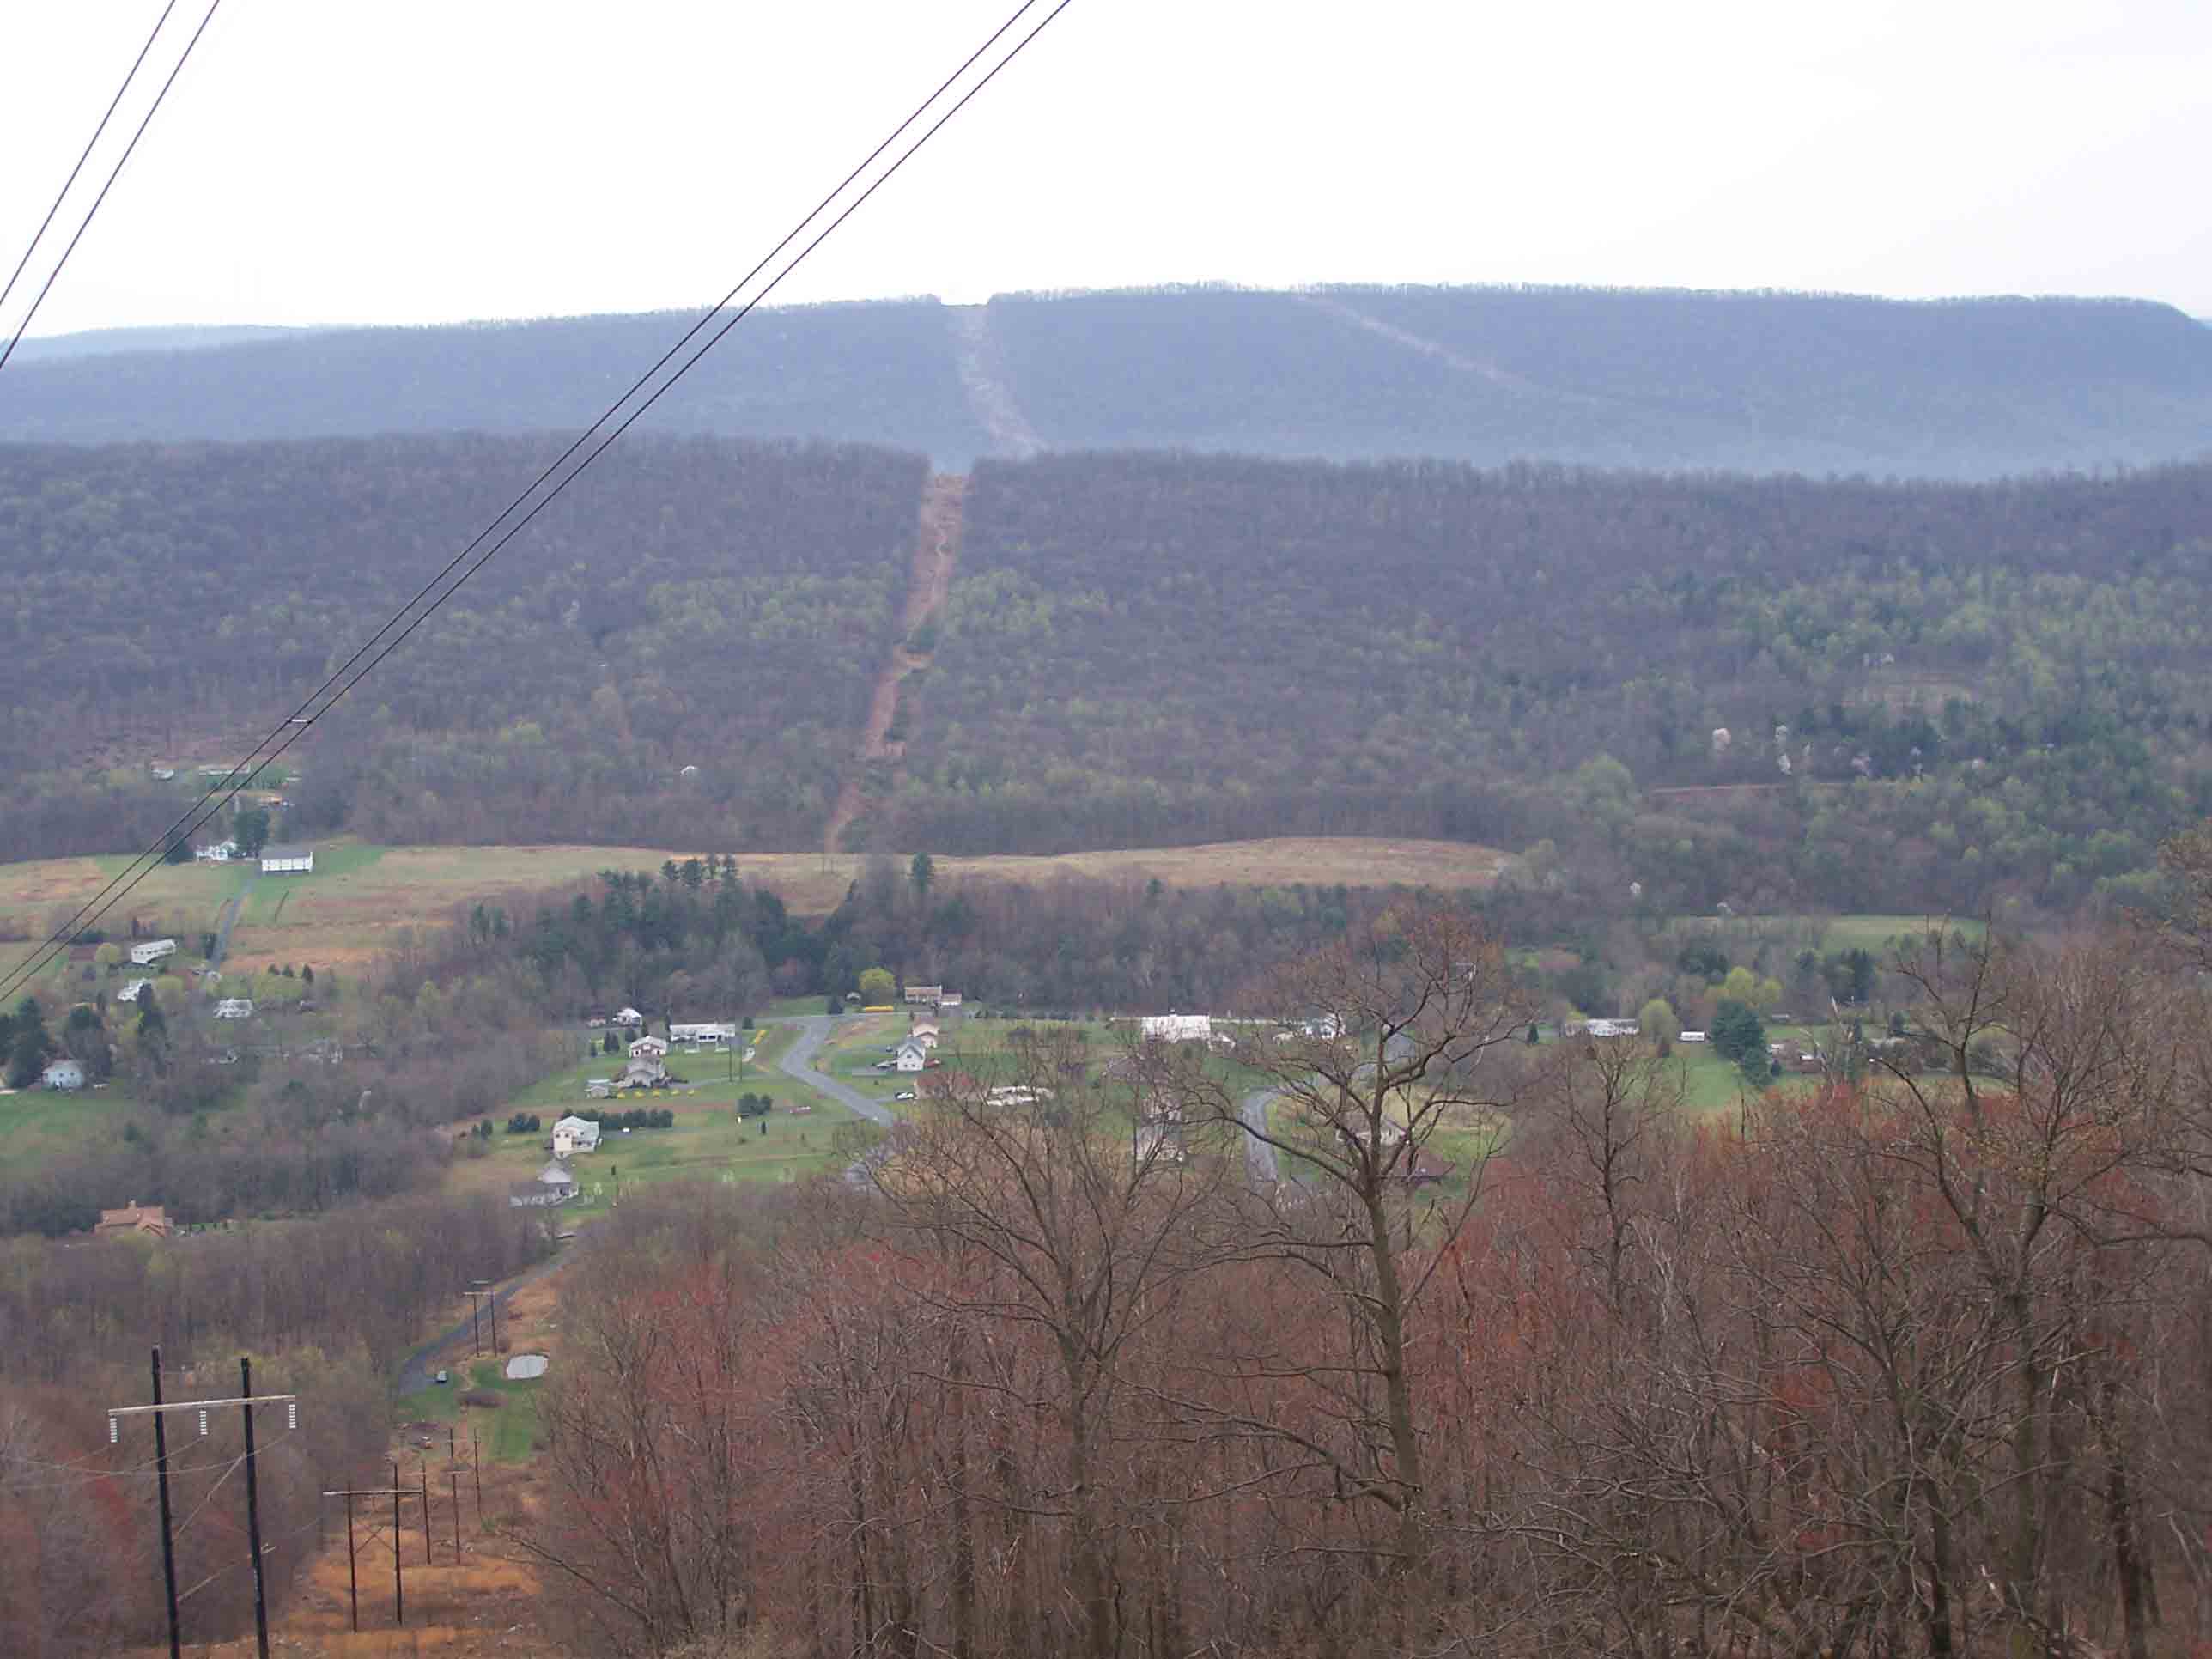 mm 8.9: View south from rocks at powerline right-of-way. Courtesy at@rohland.org